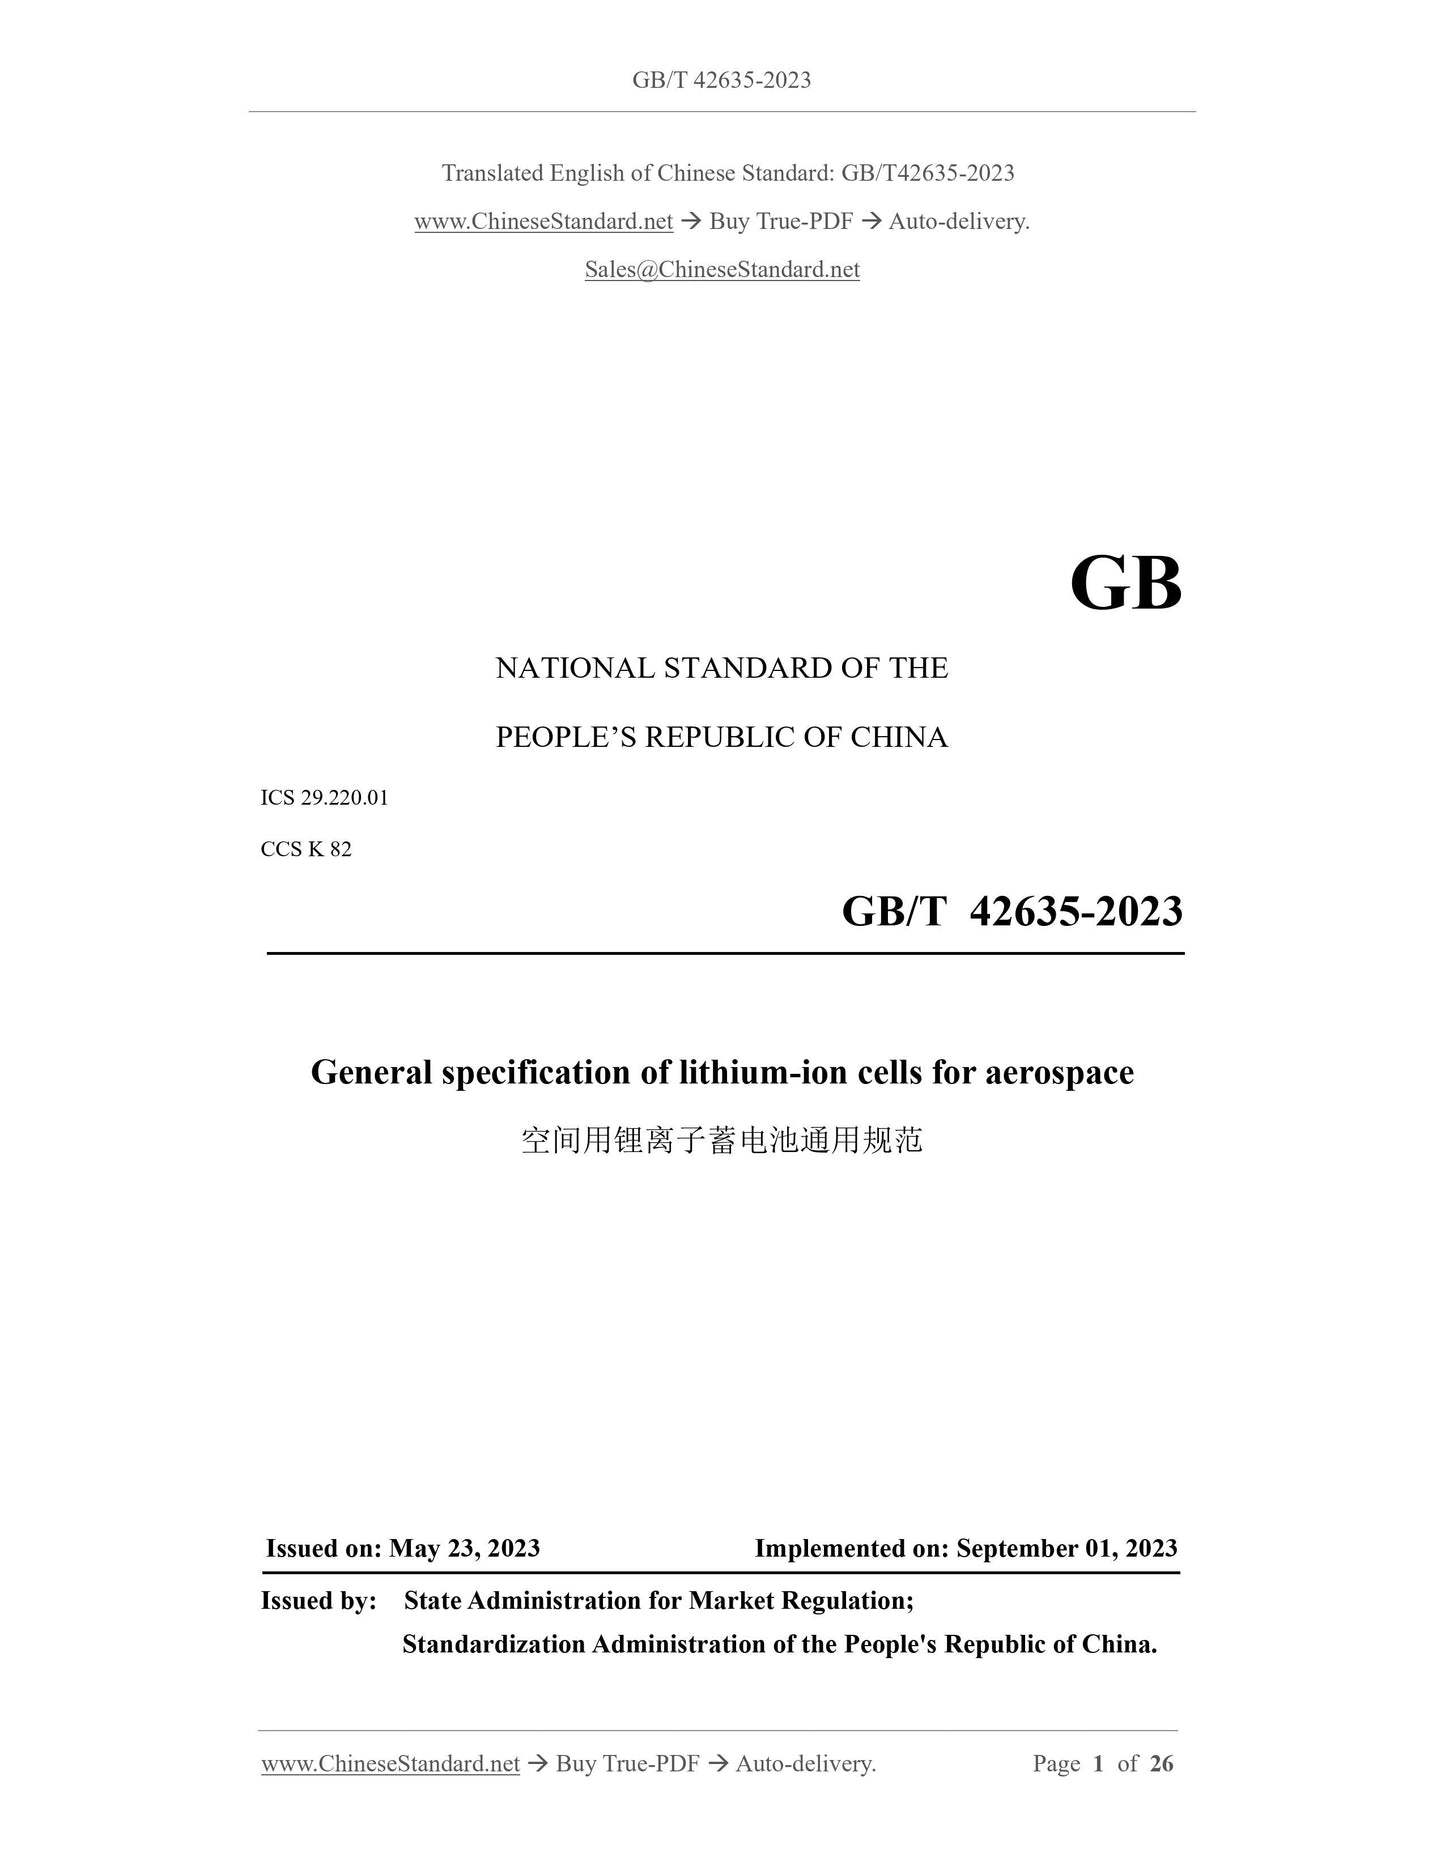 GB/T 42635-2023 Page 1